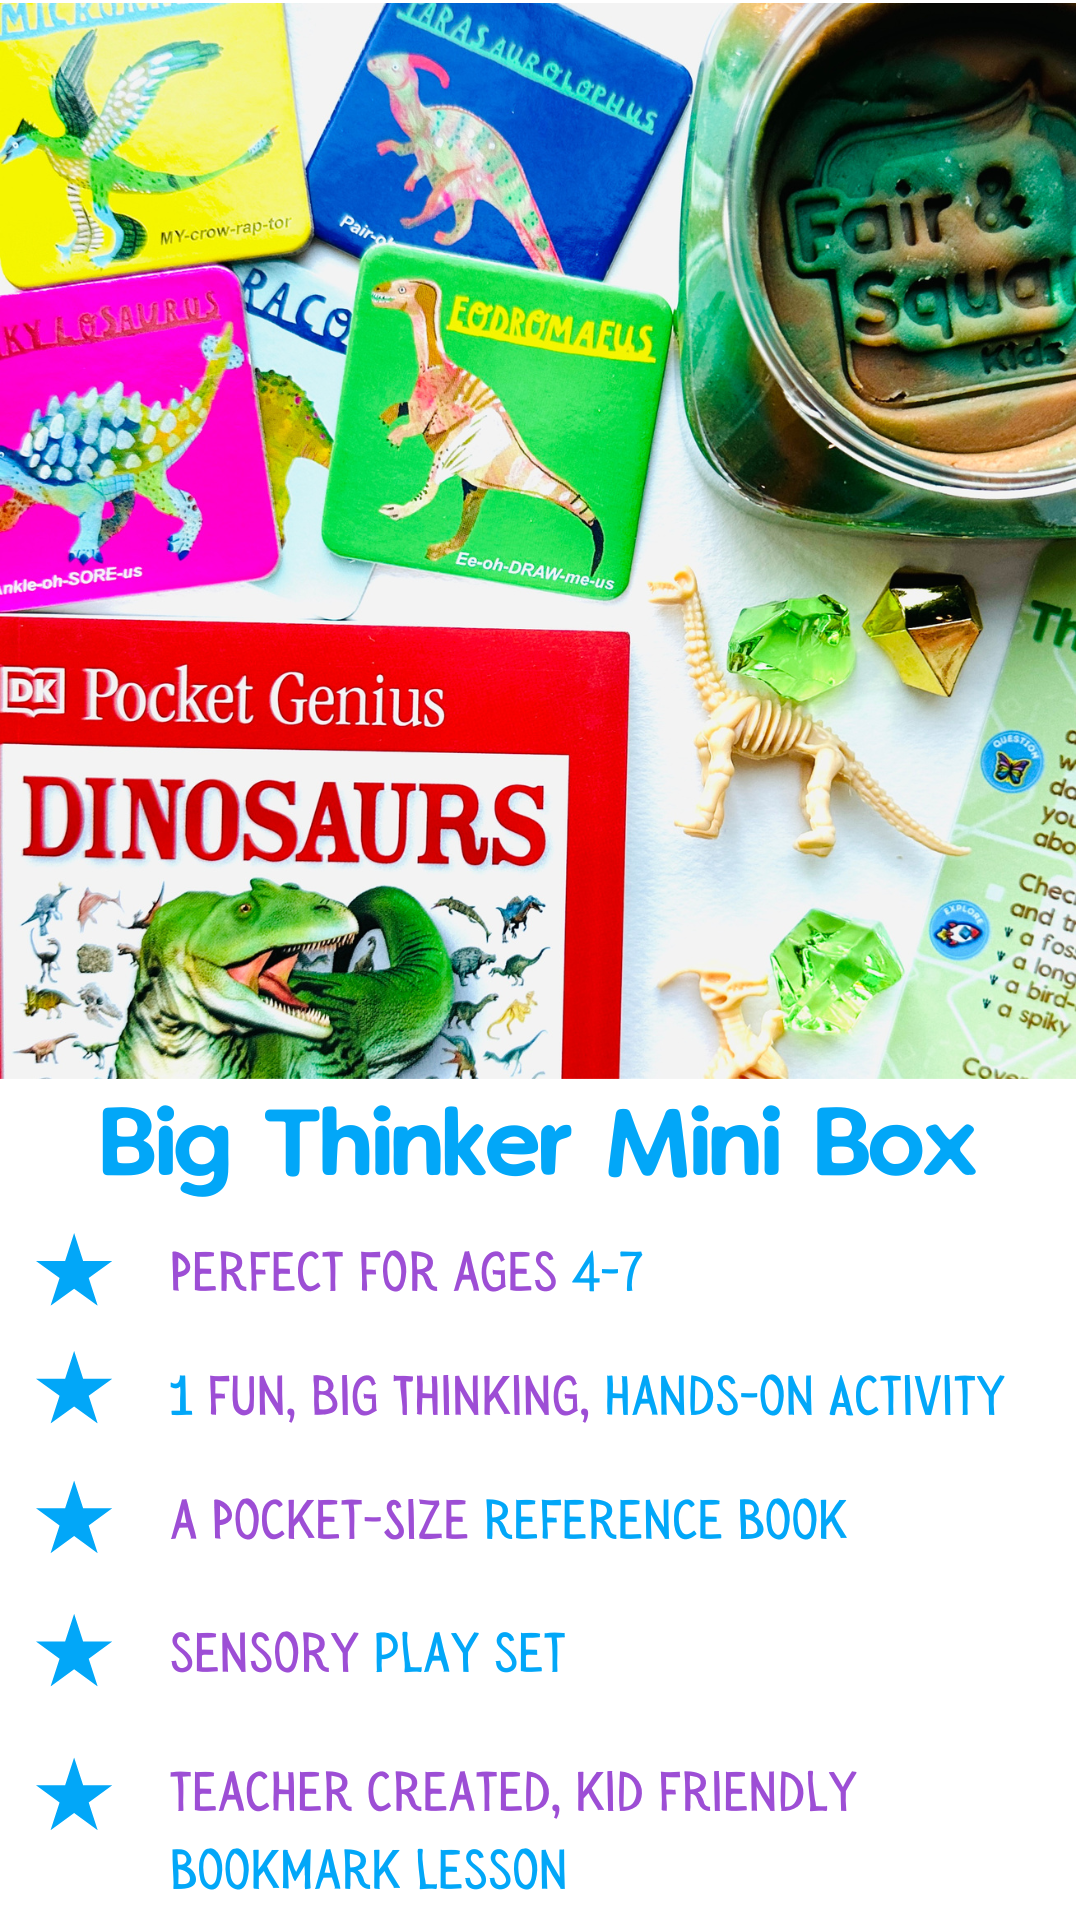 Big Thinker Mini Box: Perfect for ages 4-7. 1 fun, big thinking, hands-on activity. A pocket-size reference book. Sensory play set. Teacher created, kid friendly bookmark lesson.